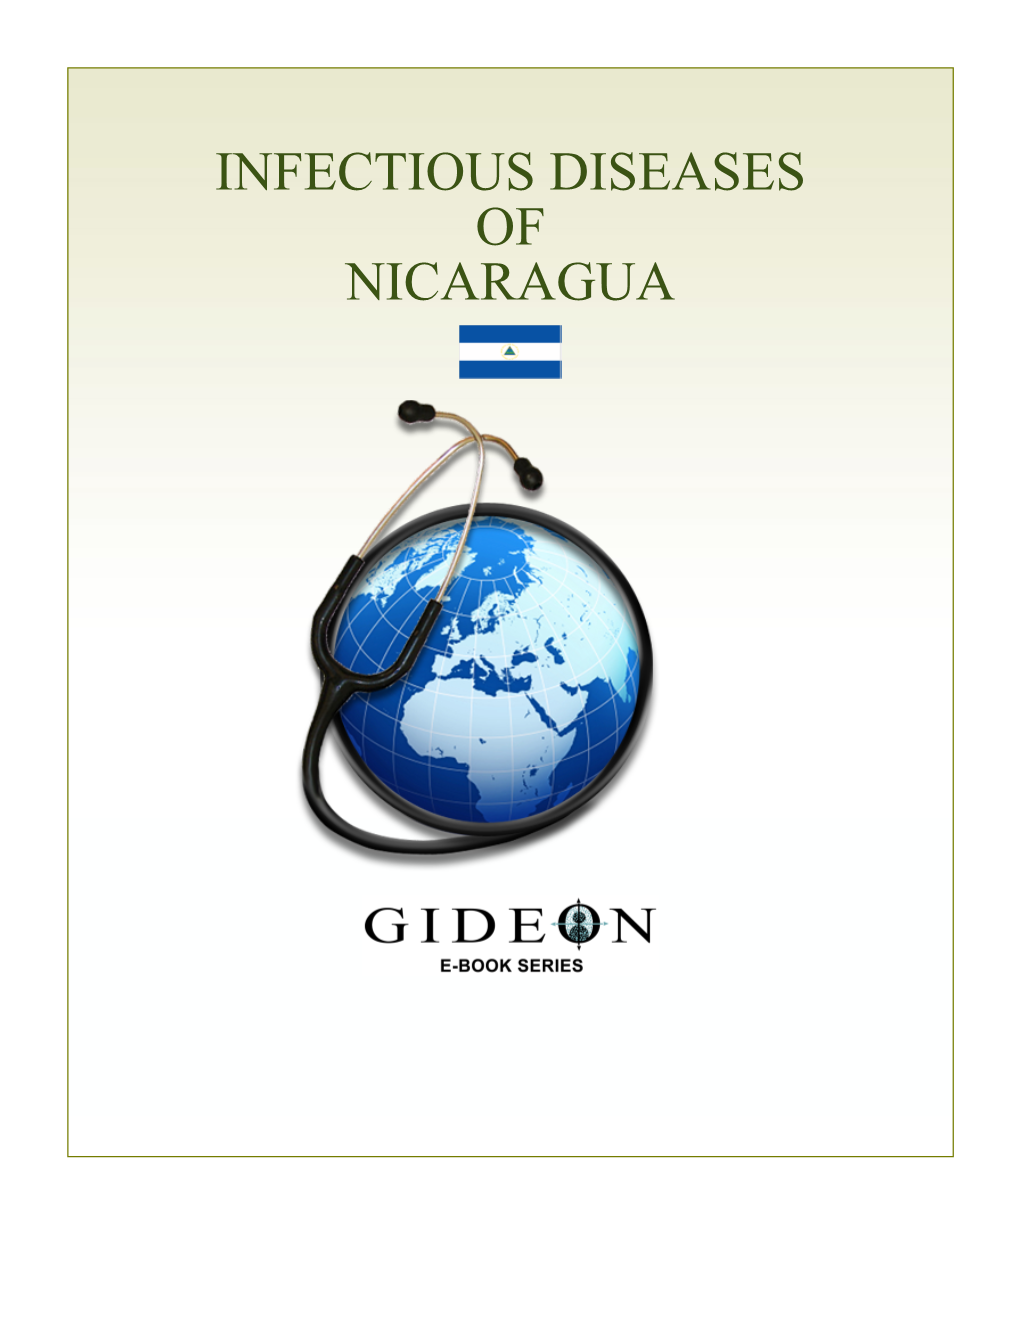 INFECTIOUS DISEASES of NICARAGUA Infectious Diseases of Nicaragua - 2010 Edition